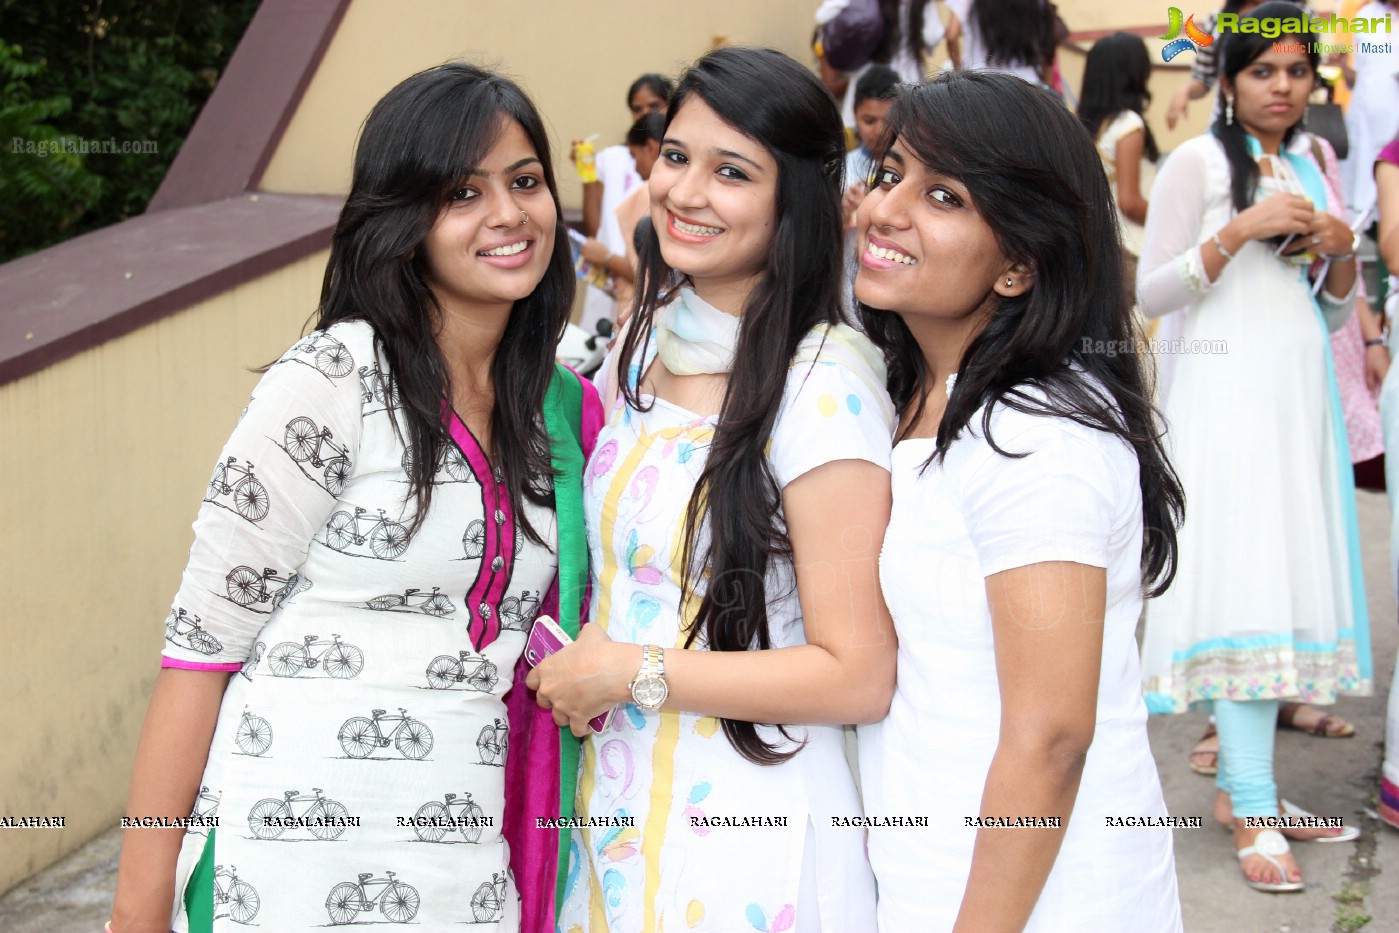 St Francis College for Women, Begumpet - 36th Convocation for 2012-13 UG and PG Batch